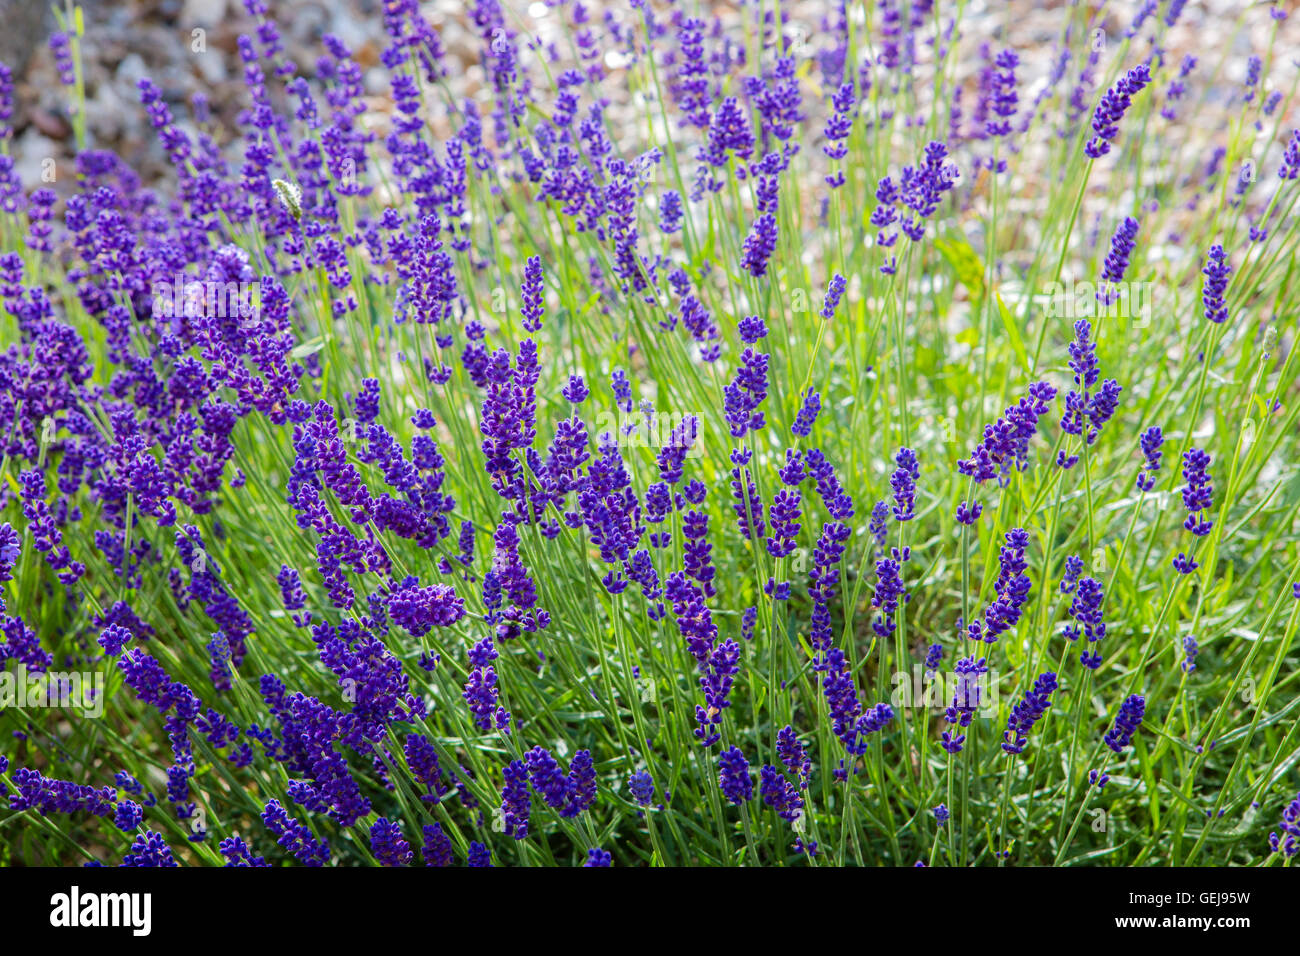 A large bush of flowering lavender in a UK garden. Stock Photo